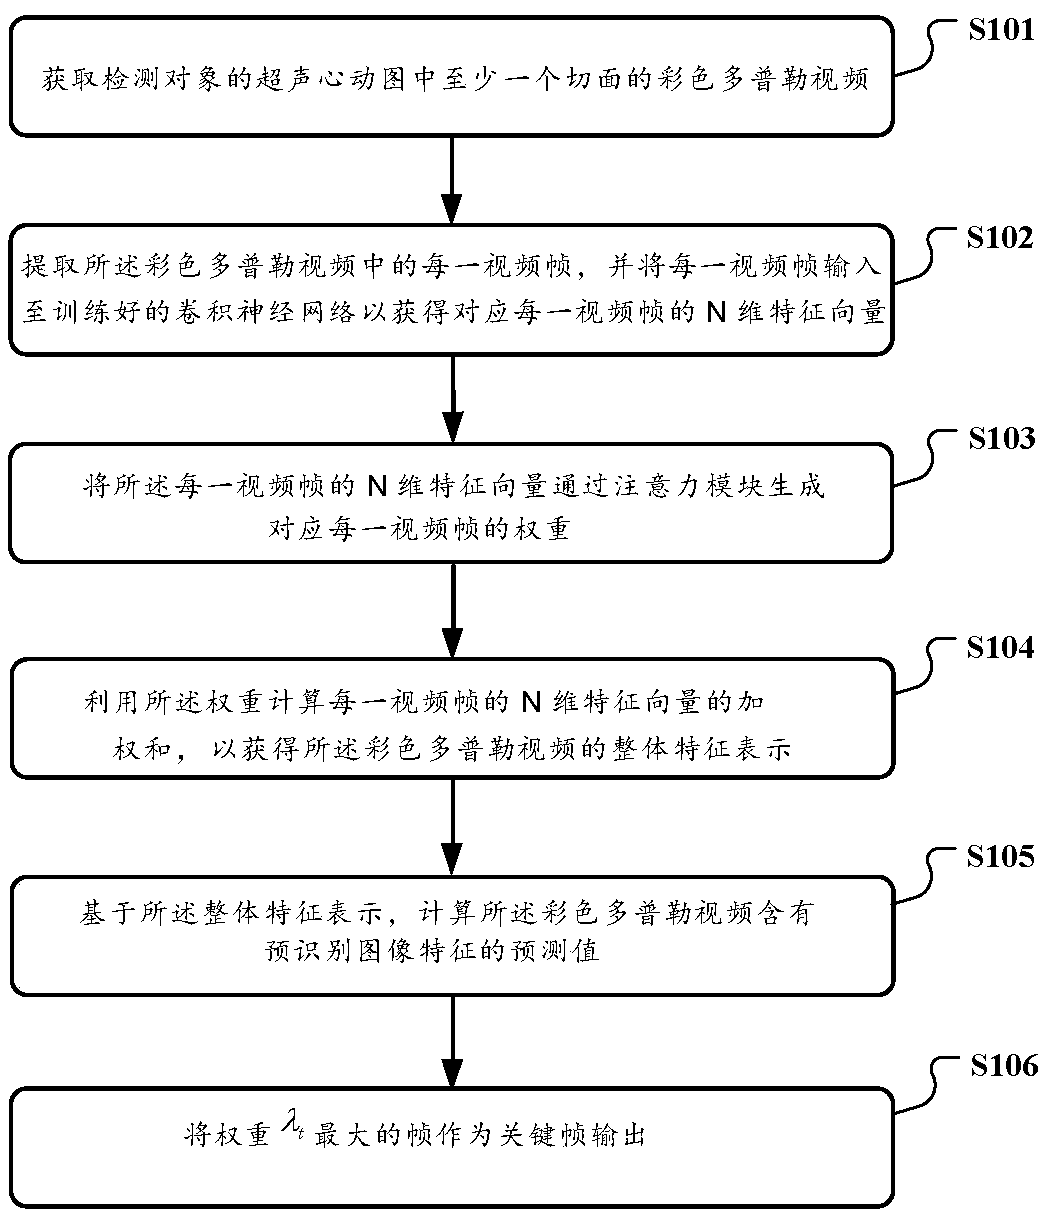 Automatic prediction and recognition method and system for echocardiogram based on artificial intelligence